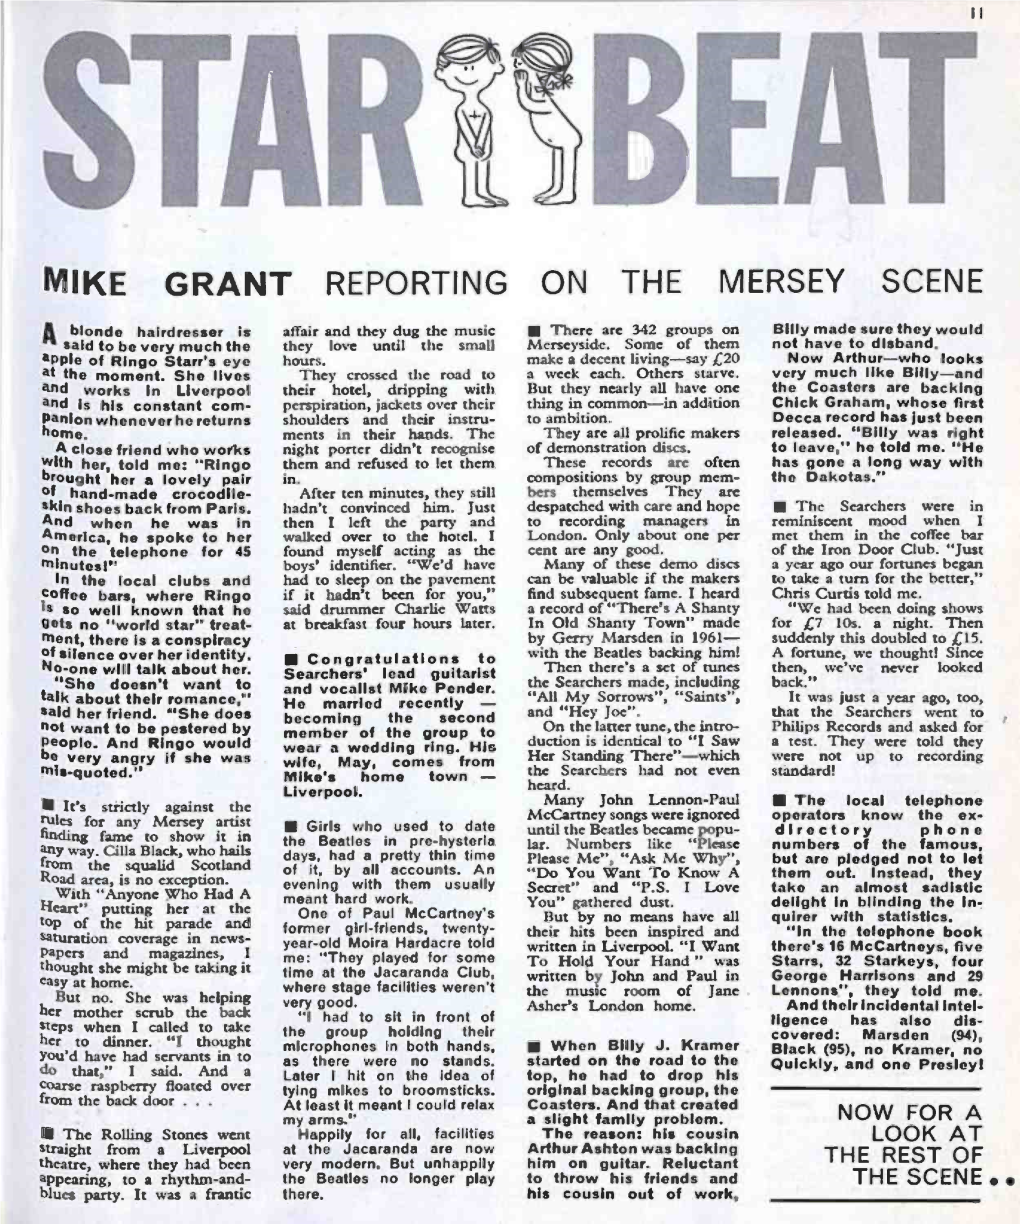 Mike Grant Reporting on the Mersey Scene